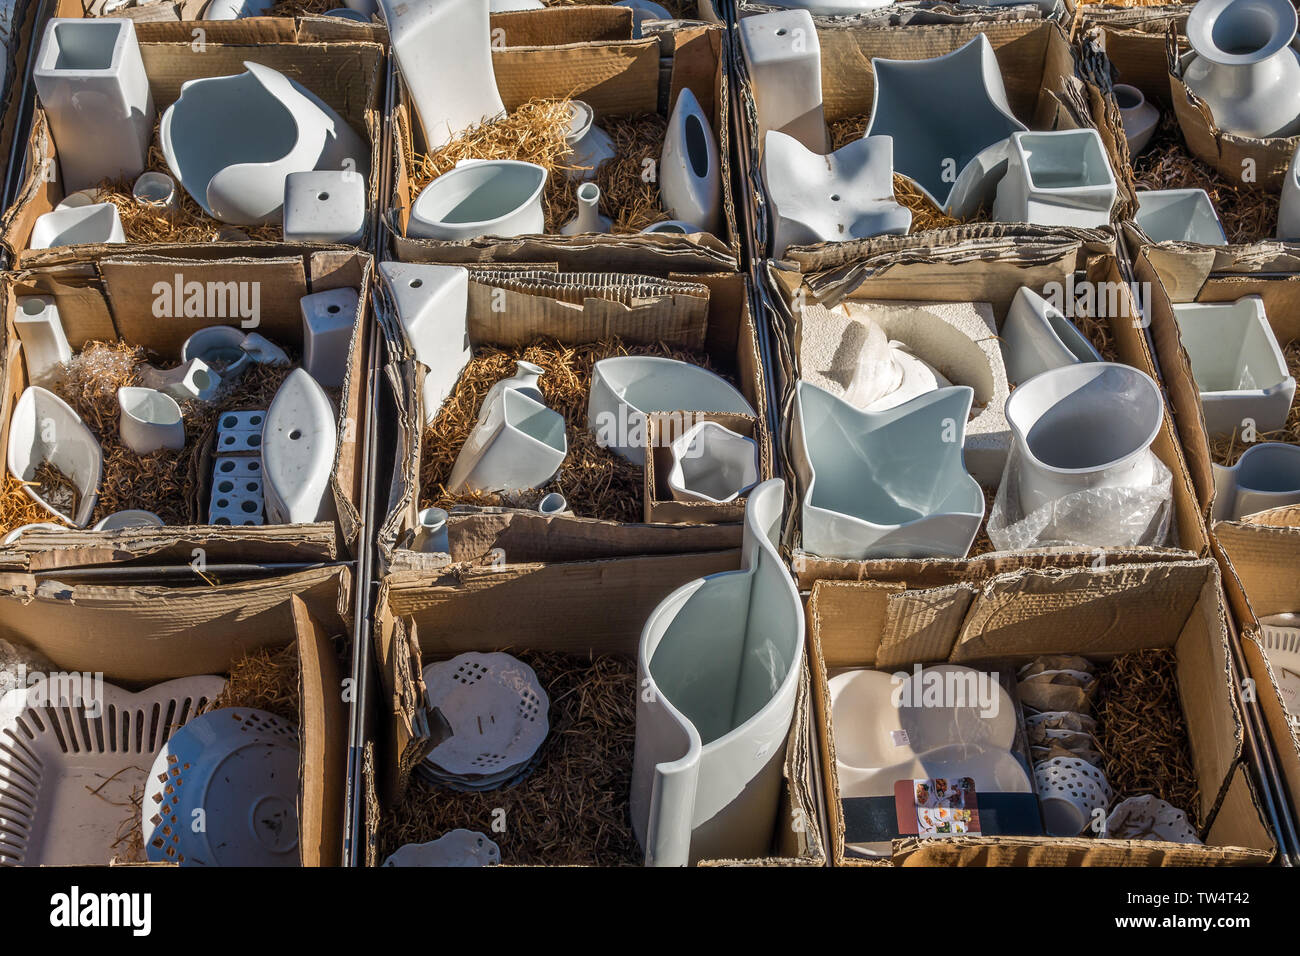 Chamonix, France - 23 March 2019: Closeup of various white porcelain items on display in trays crates and boxes at Saturday market place in Chamonix F Stock Photo